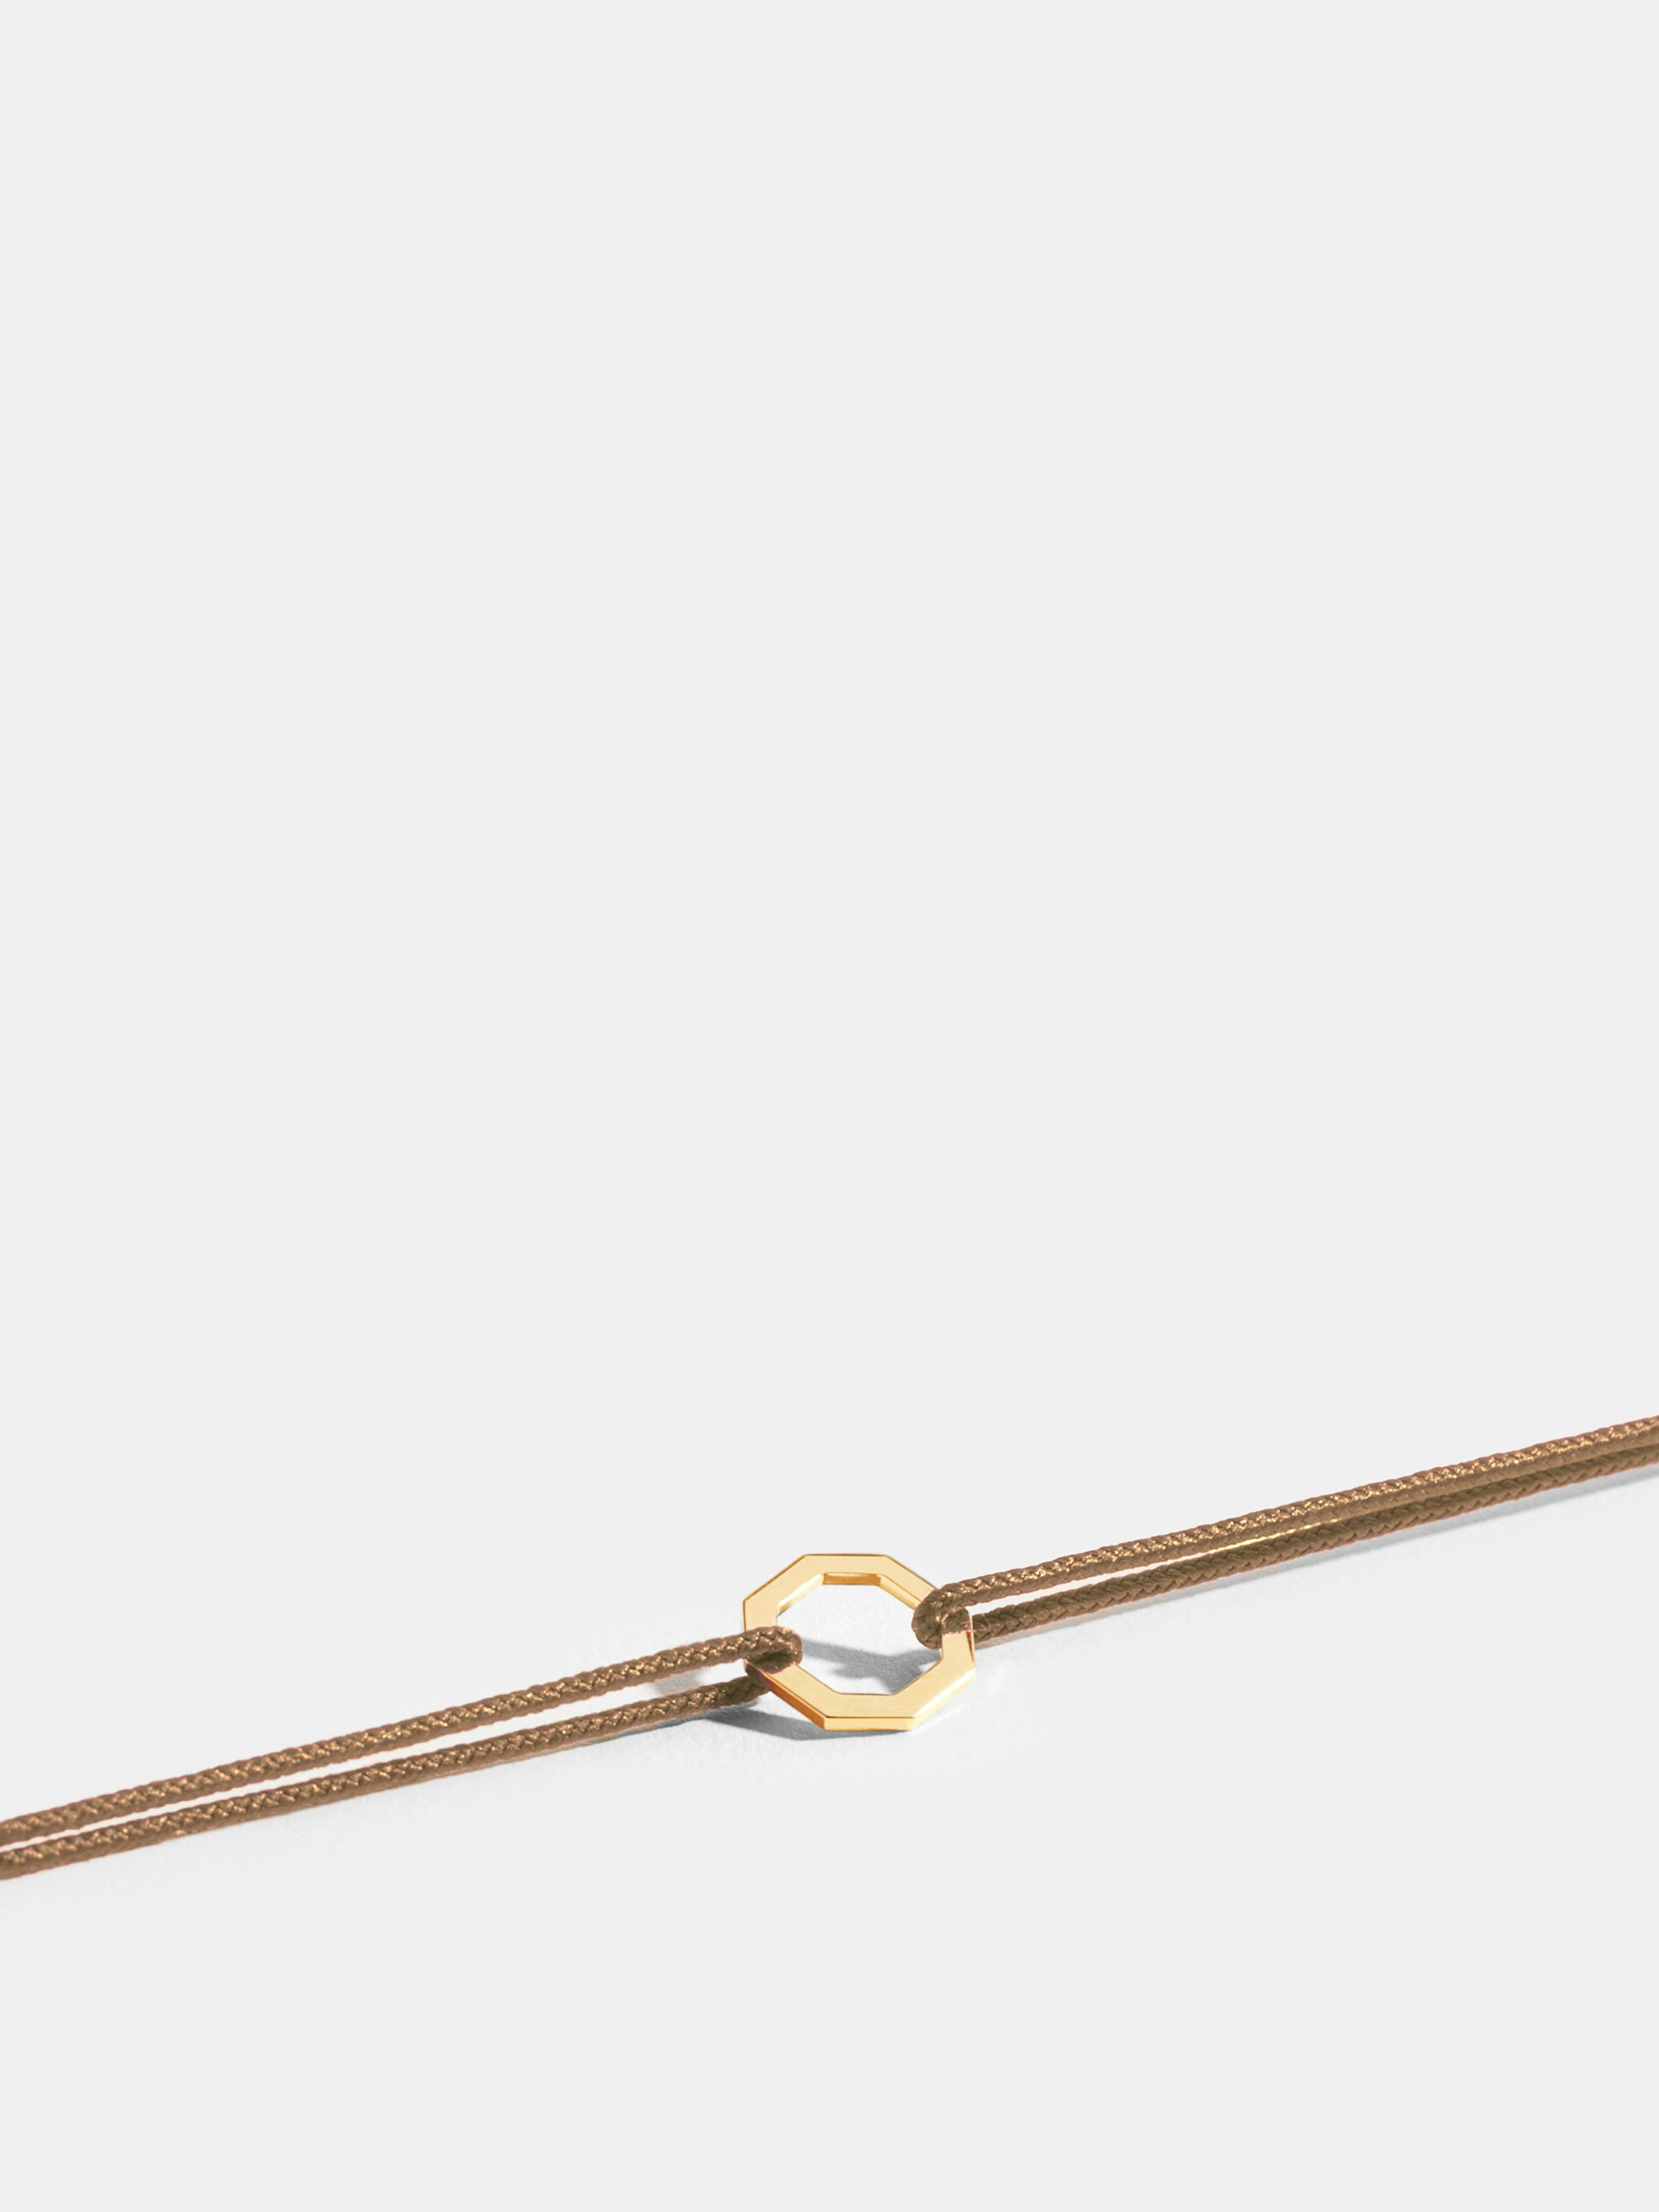 Octogone motif in 18k Fairmined ethical yellow gold, on a honey yellow cord. 